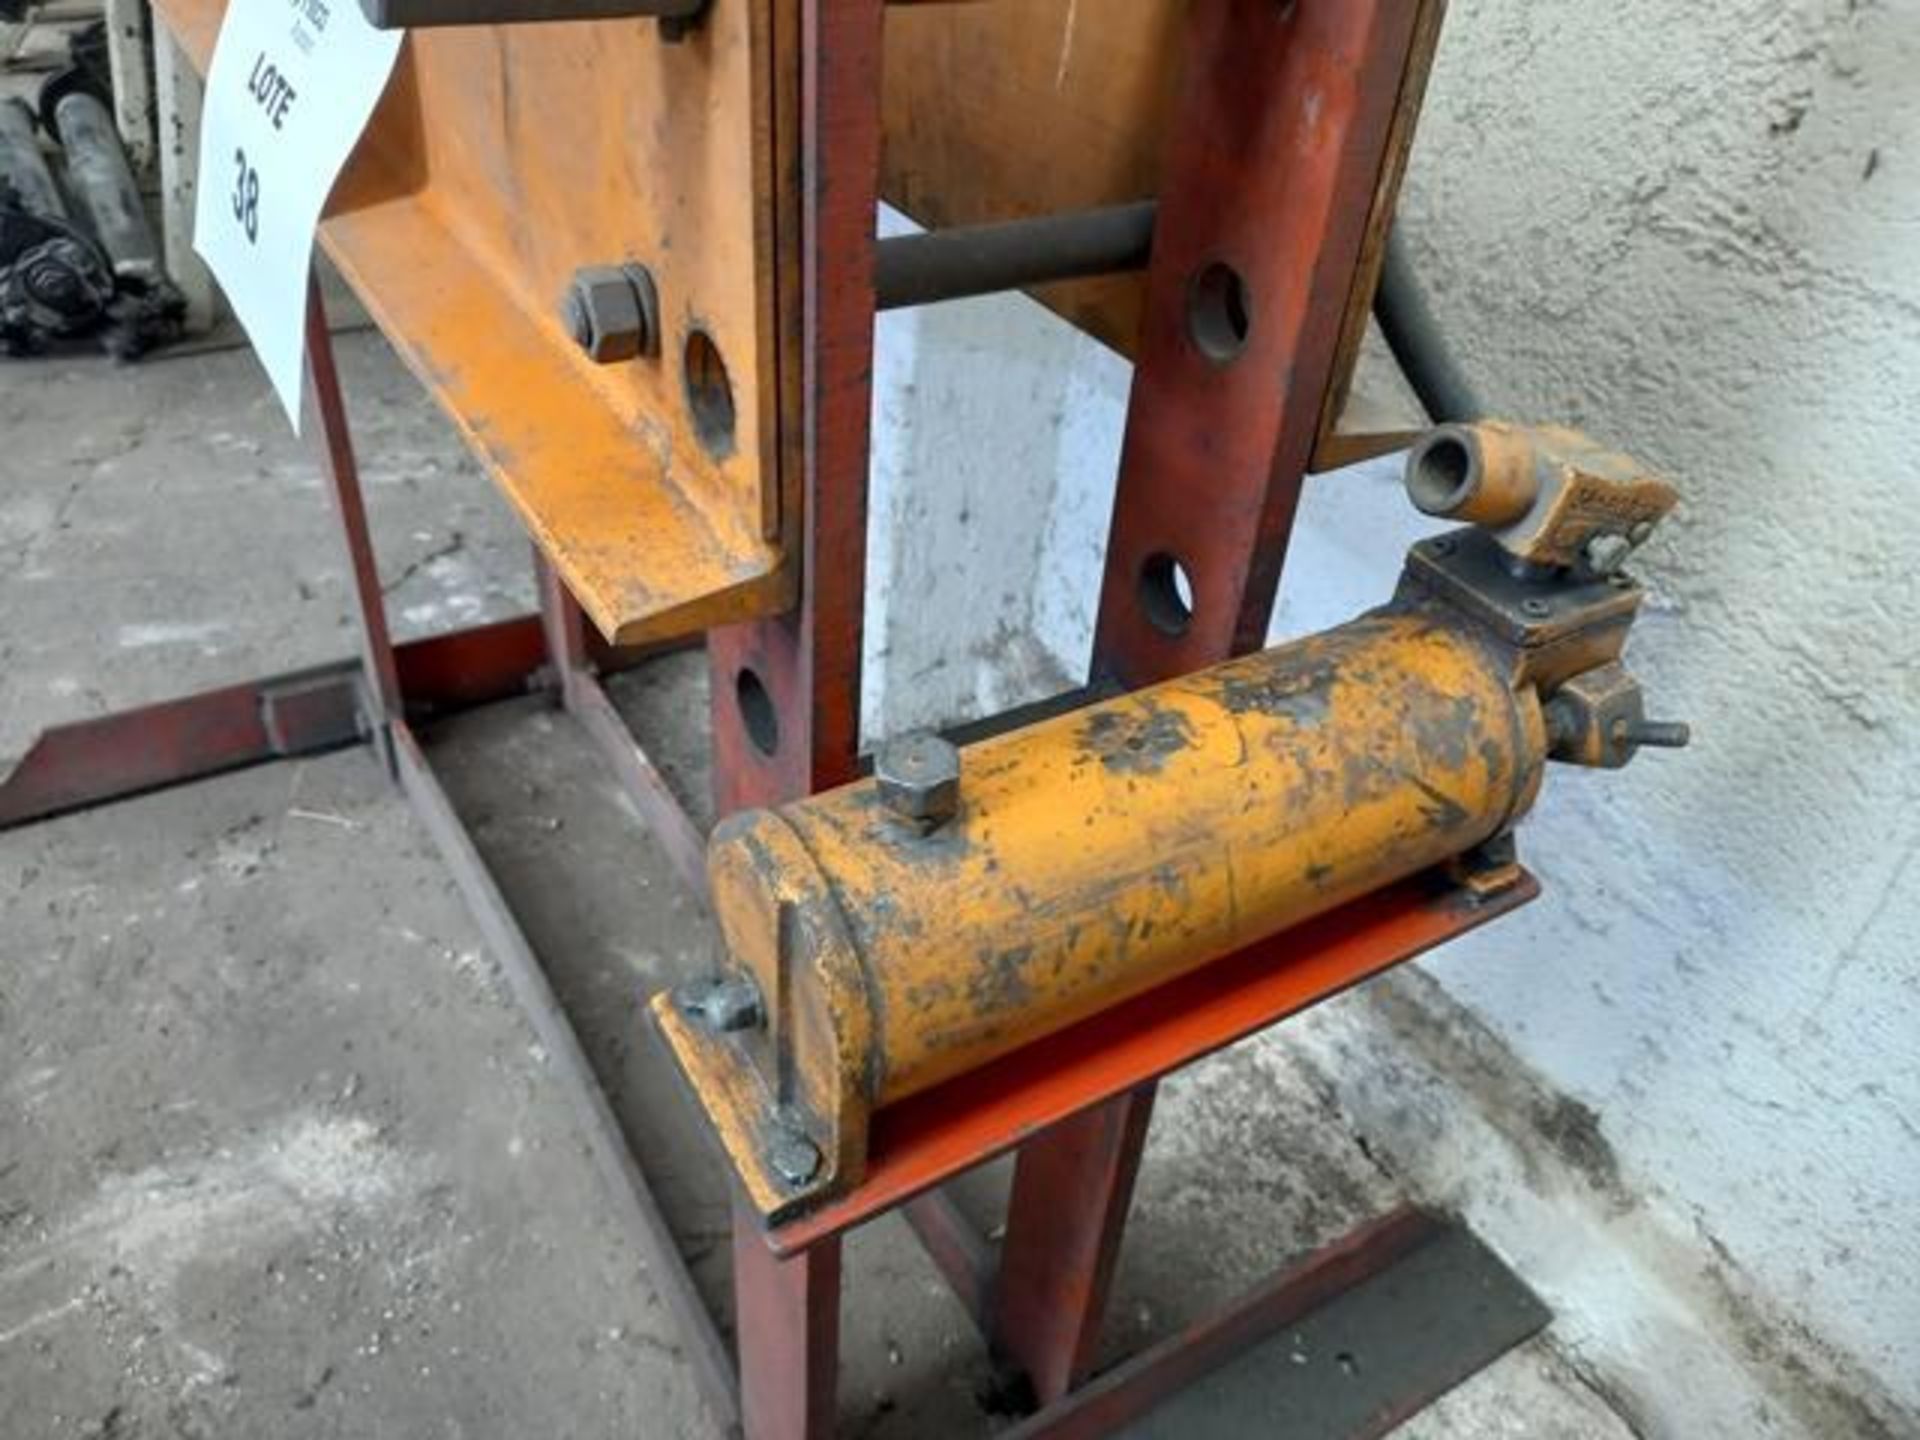 Erkco Press: Incomplete, Carbon Steel Frame only (Label: 38) (Location: Pachuca, Hidalgo) (REMOVAL - Image 7 of 9